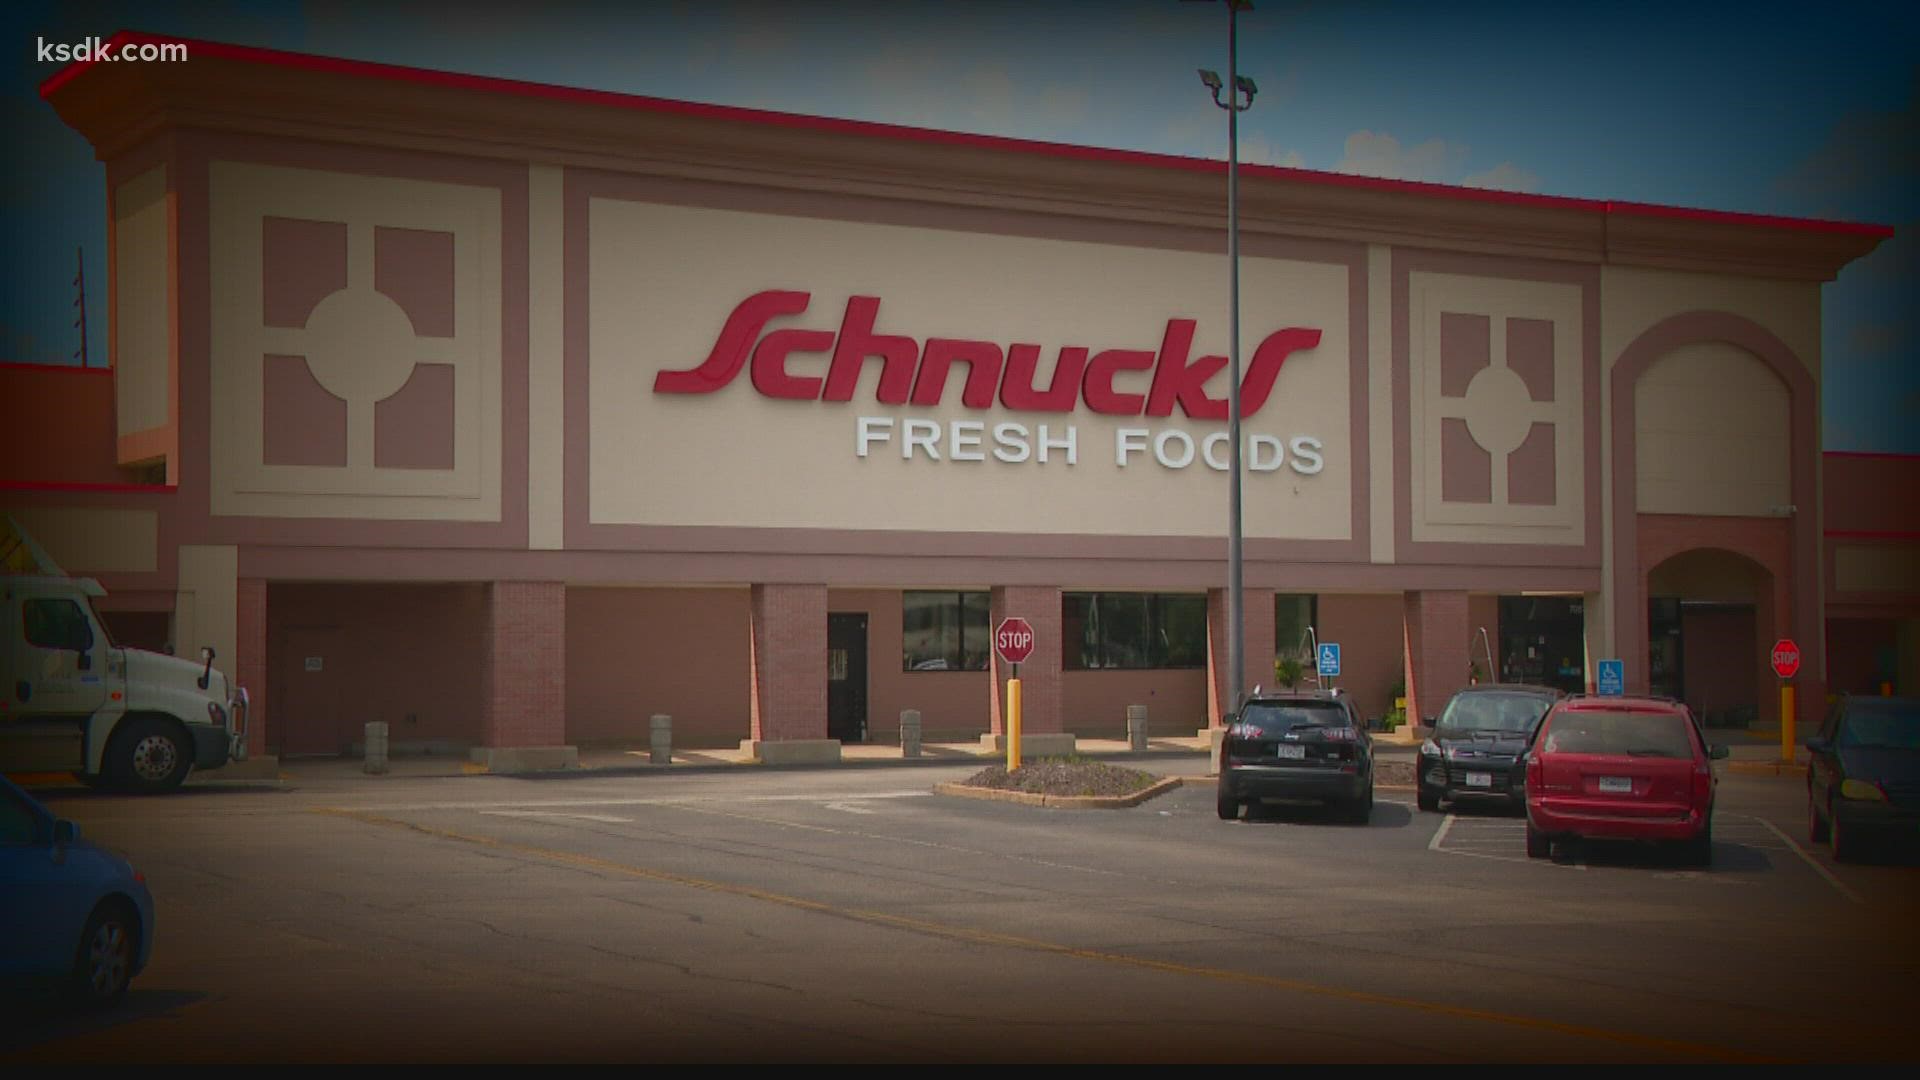 Schnucks announces bonuses, new daily and holiday hours